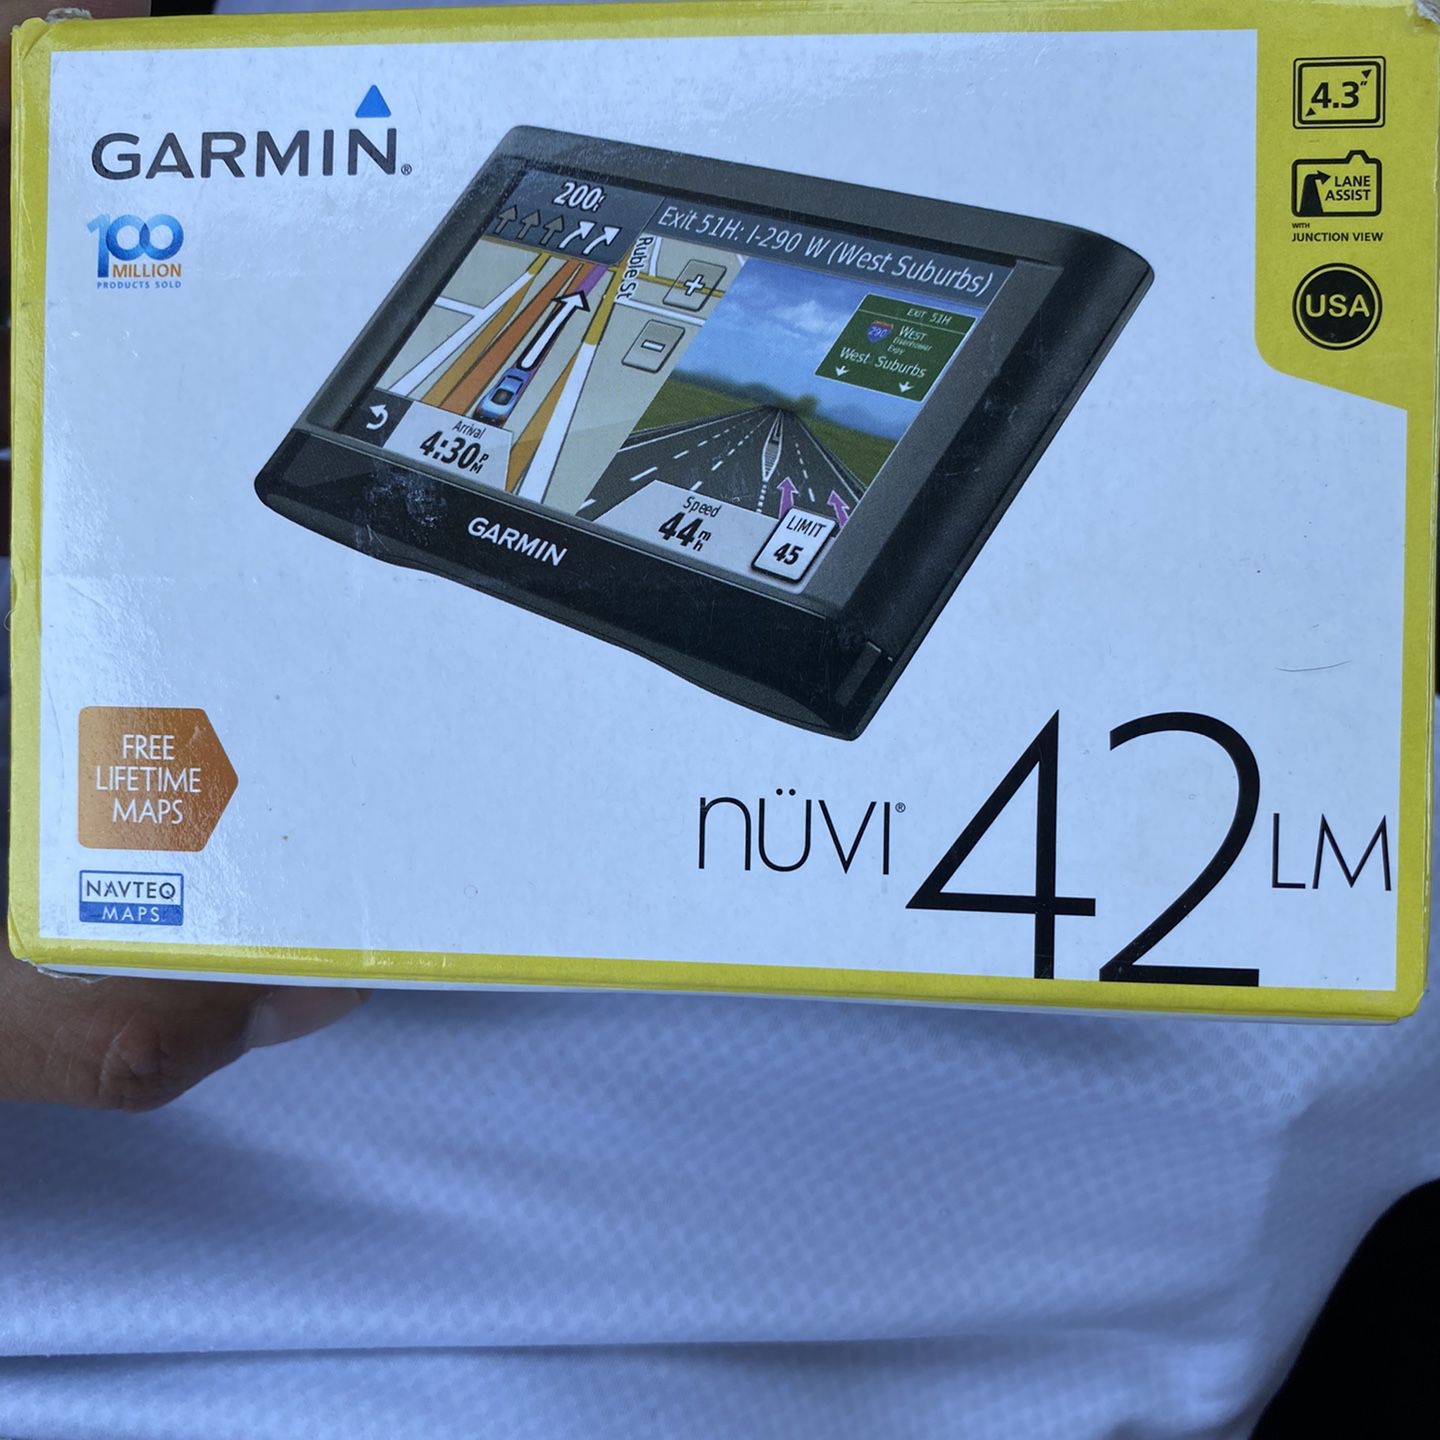 GPS nüvi 42 LM for Sale in Bakersfield, CA OfferUp